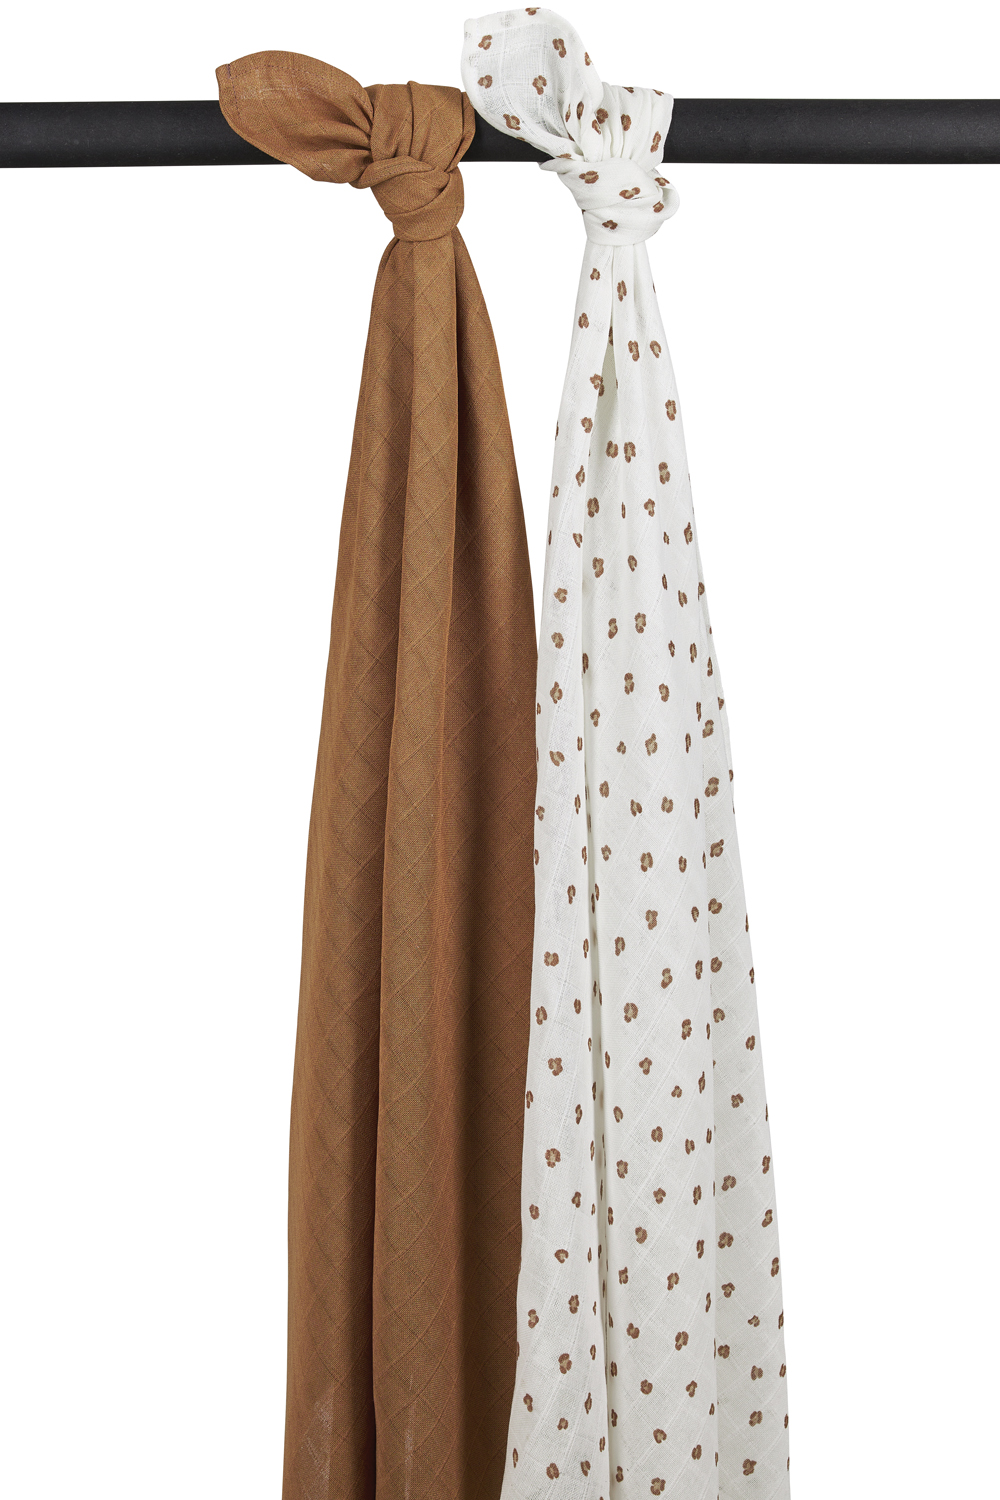 Musselin swaddles 2-pack Mini Panther - Toffee - 120x120cm